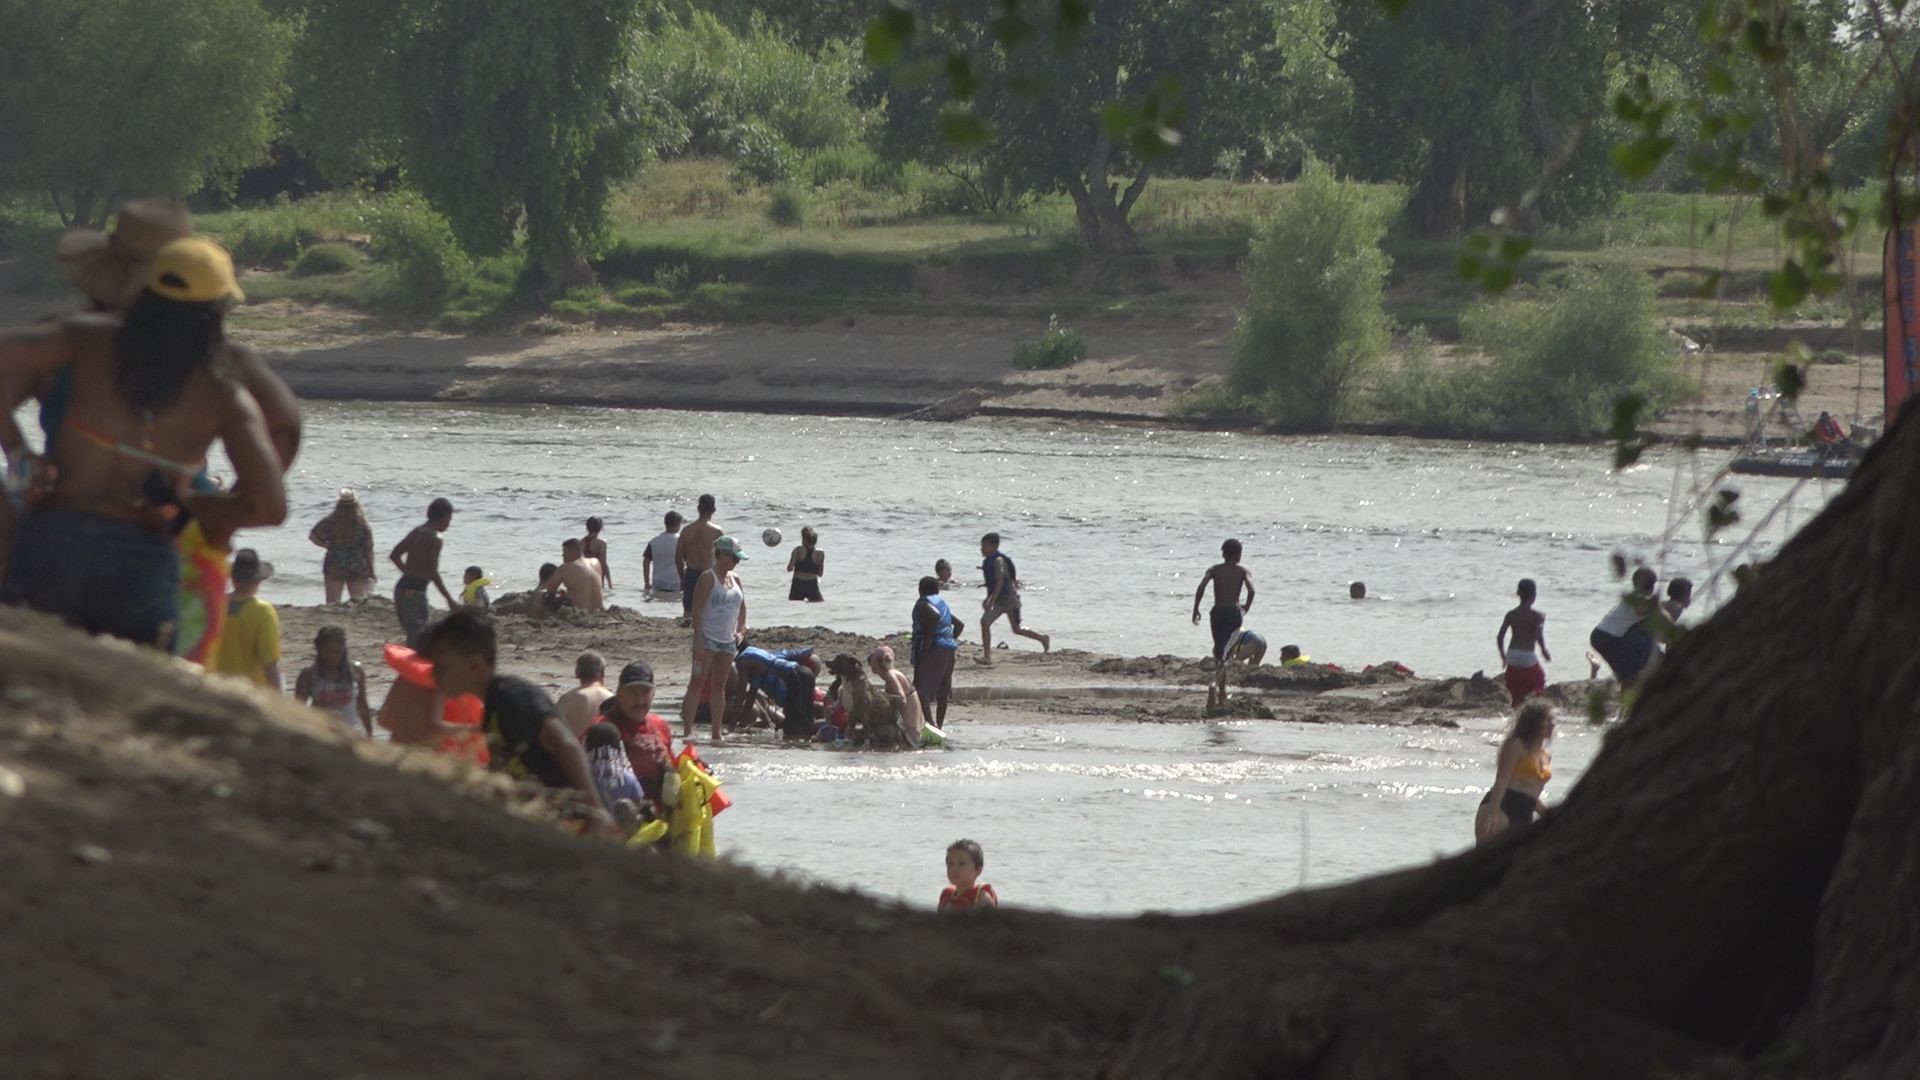 The Sacramento area Drowning Accident Rescue Team were stationed at Tiscornia Park to keep people safe during the Fourth of July weekend.